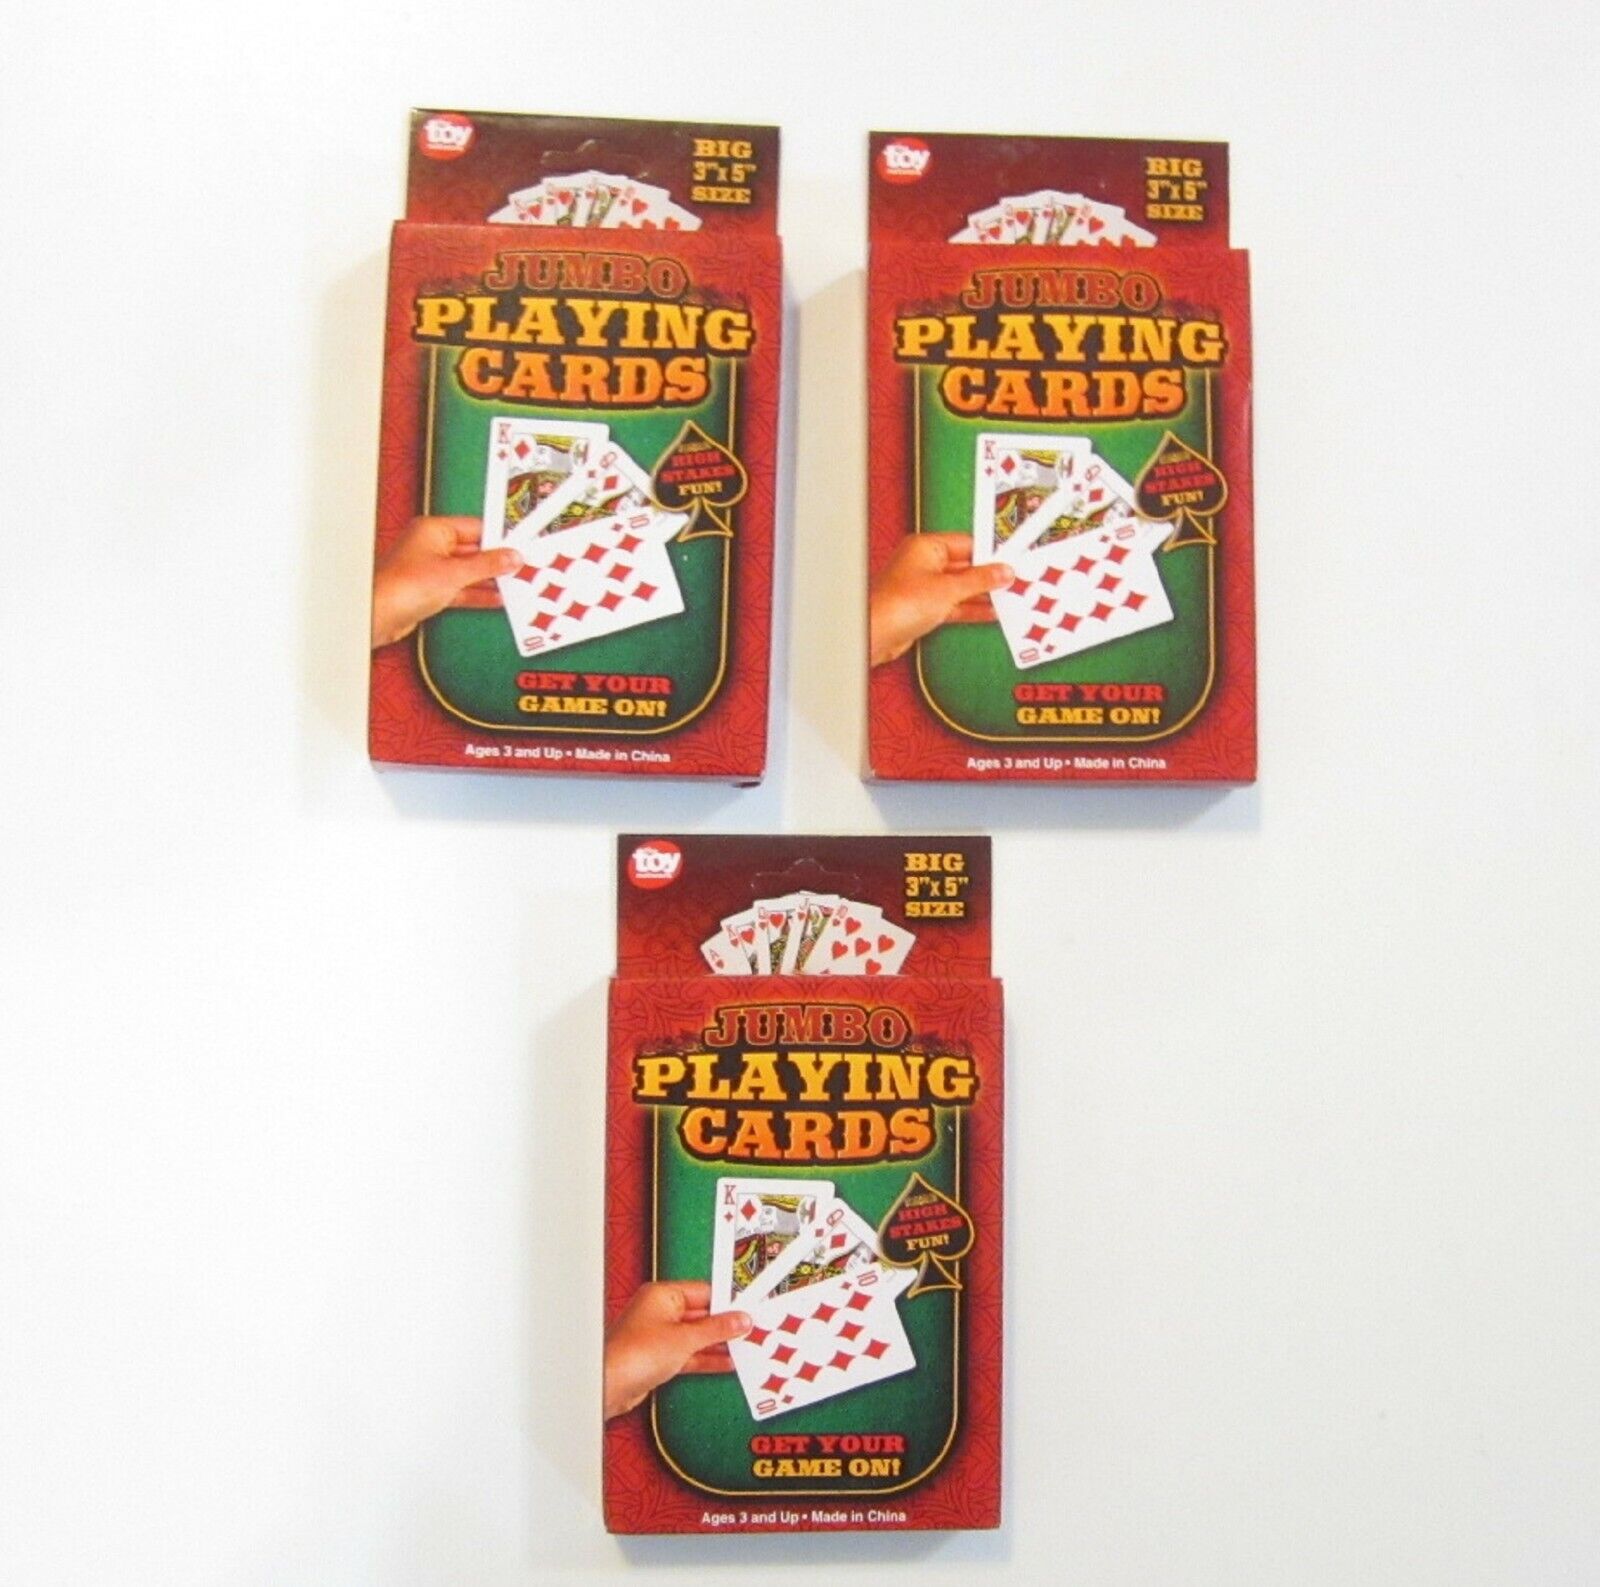 3 NEW DECKS OF JUMBO PLAYING CARDS LARGE PLASTIC COATED POKER CARD DECK 3\